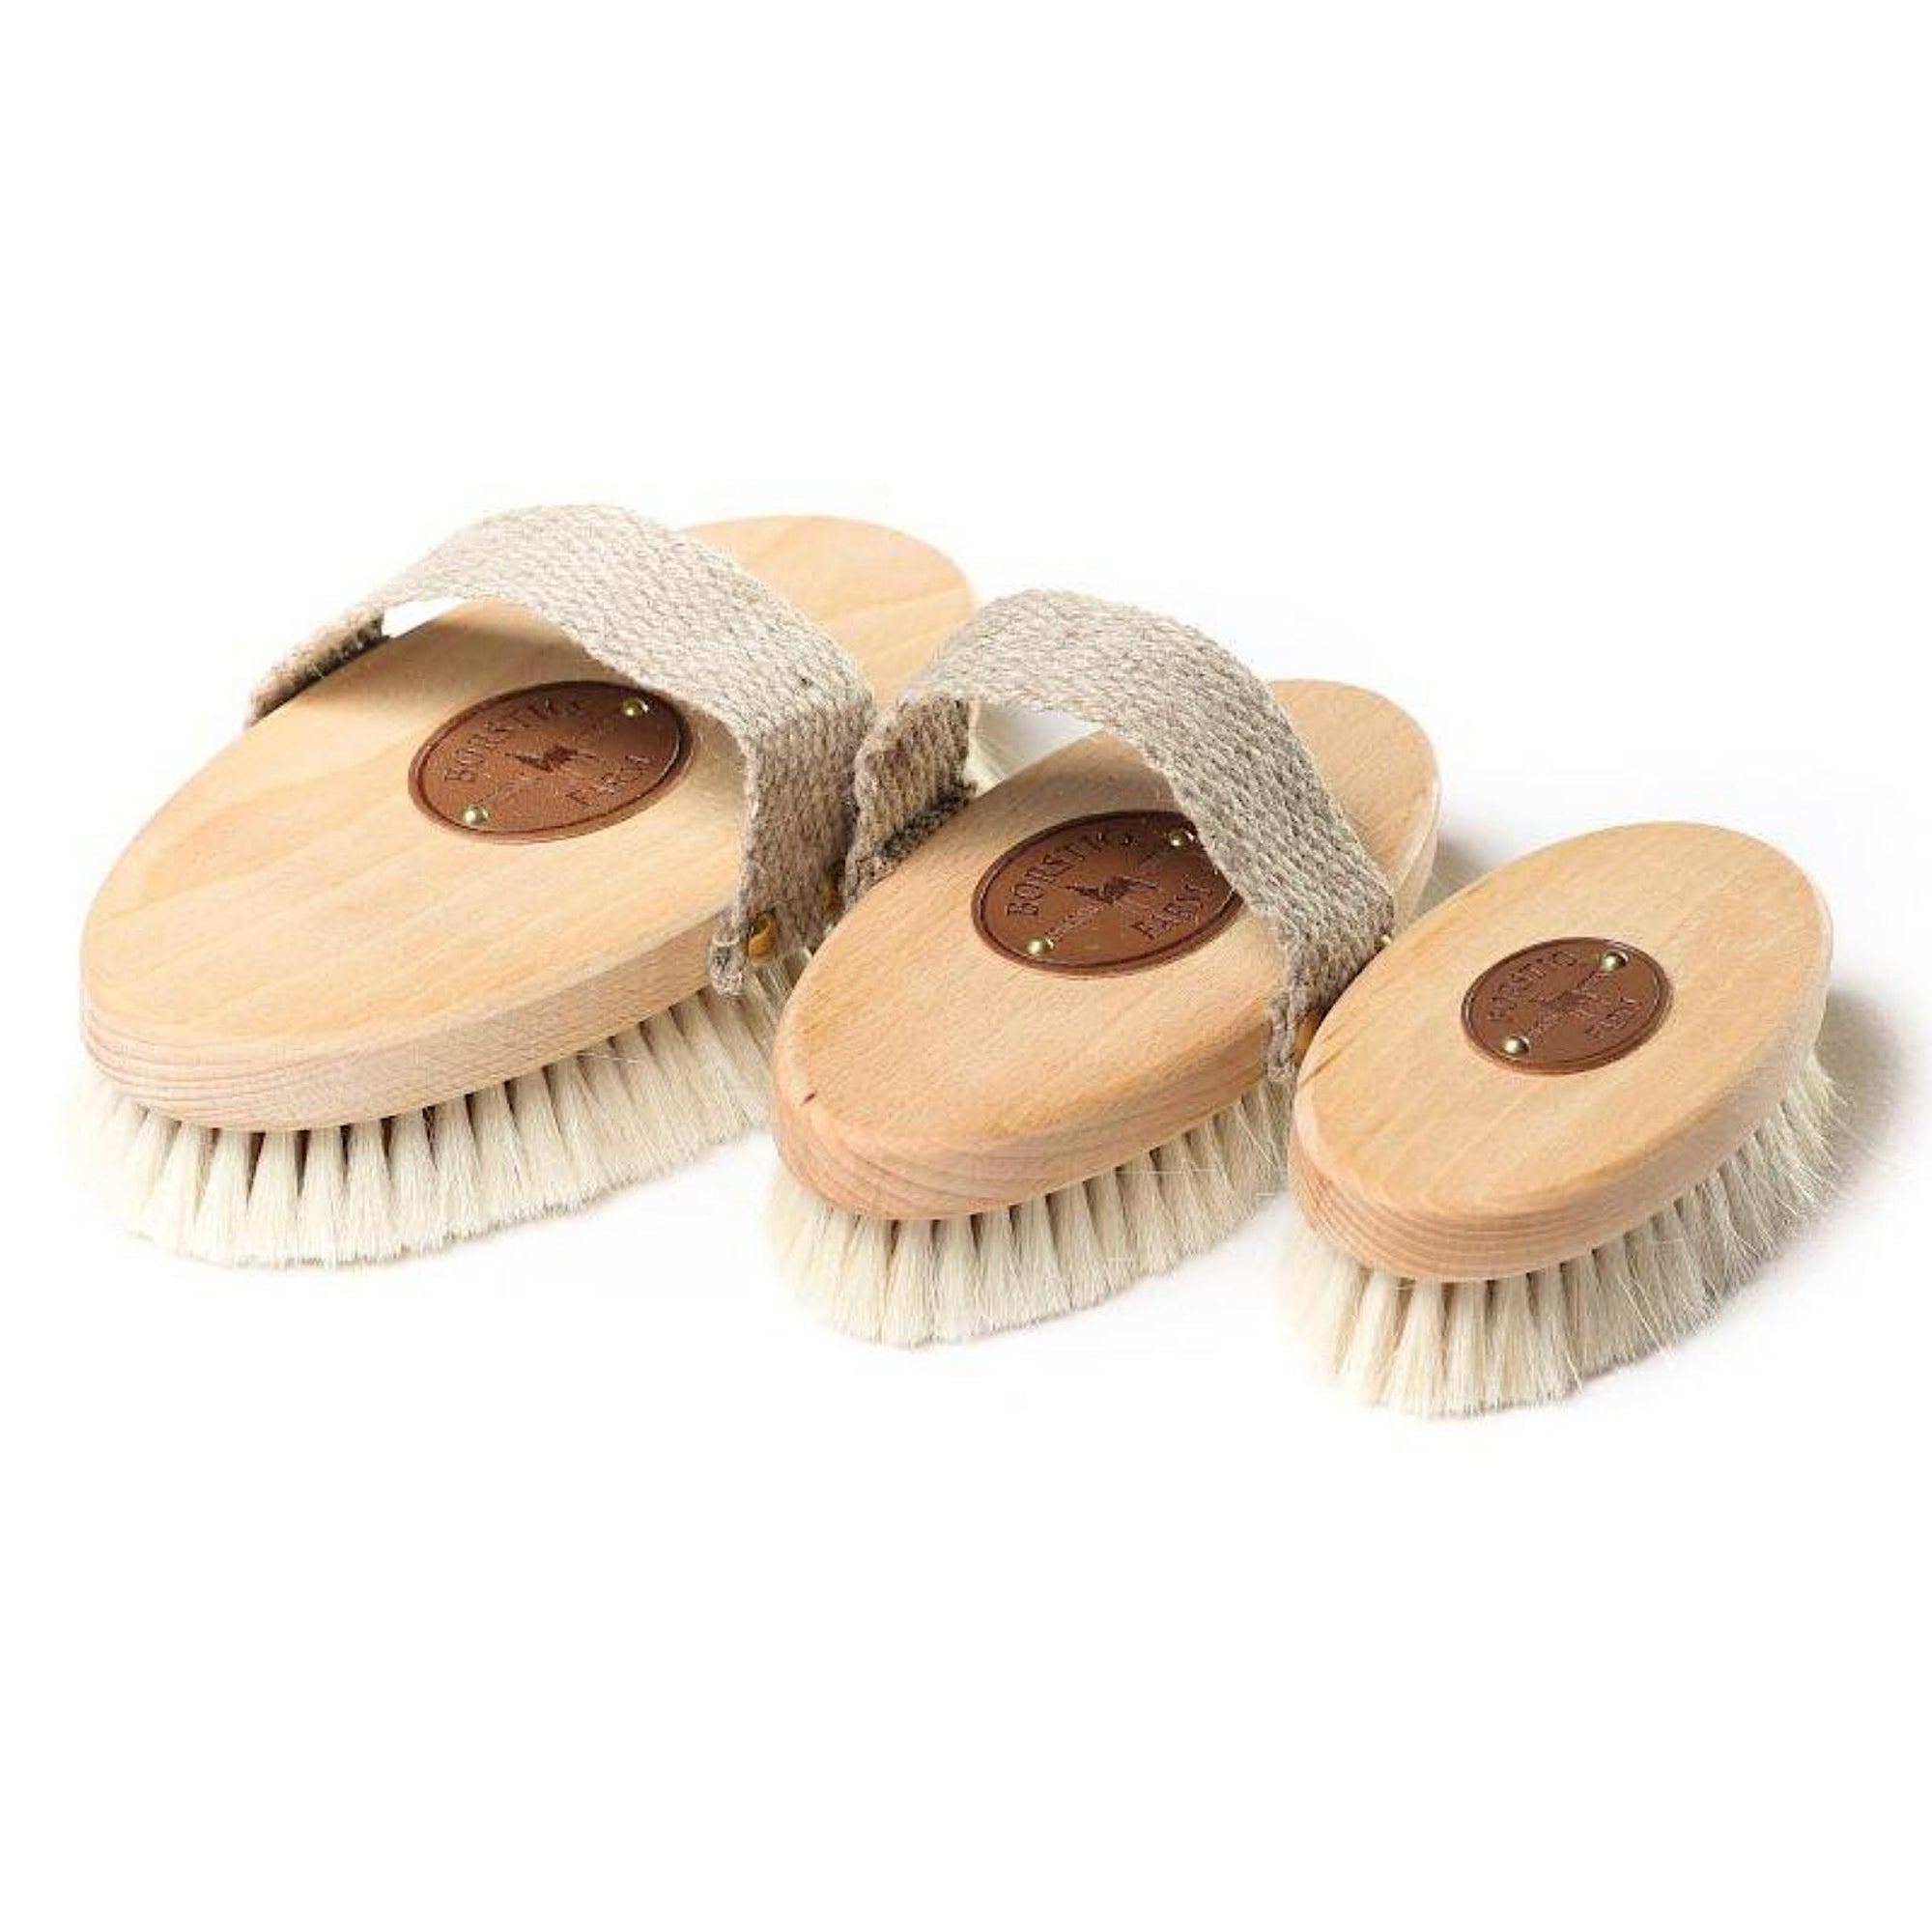 Oval shaped wooden brushes with soft short bristles.